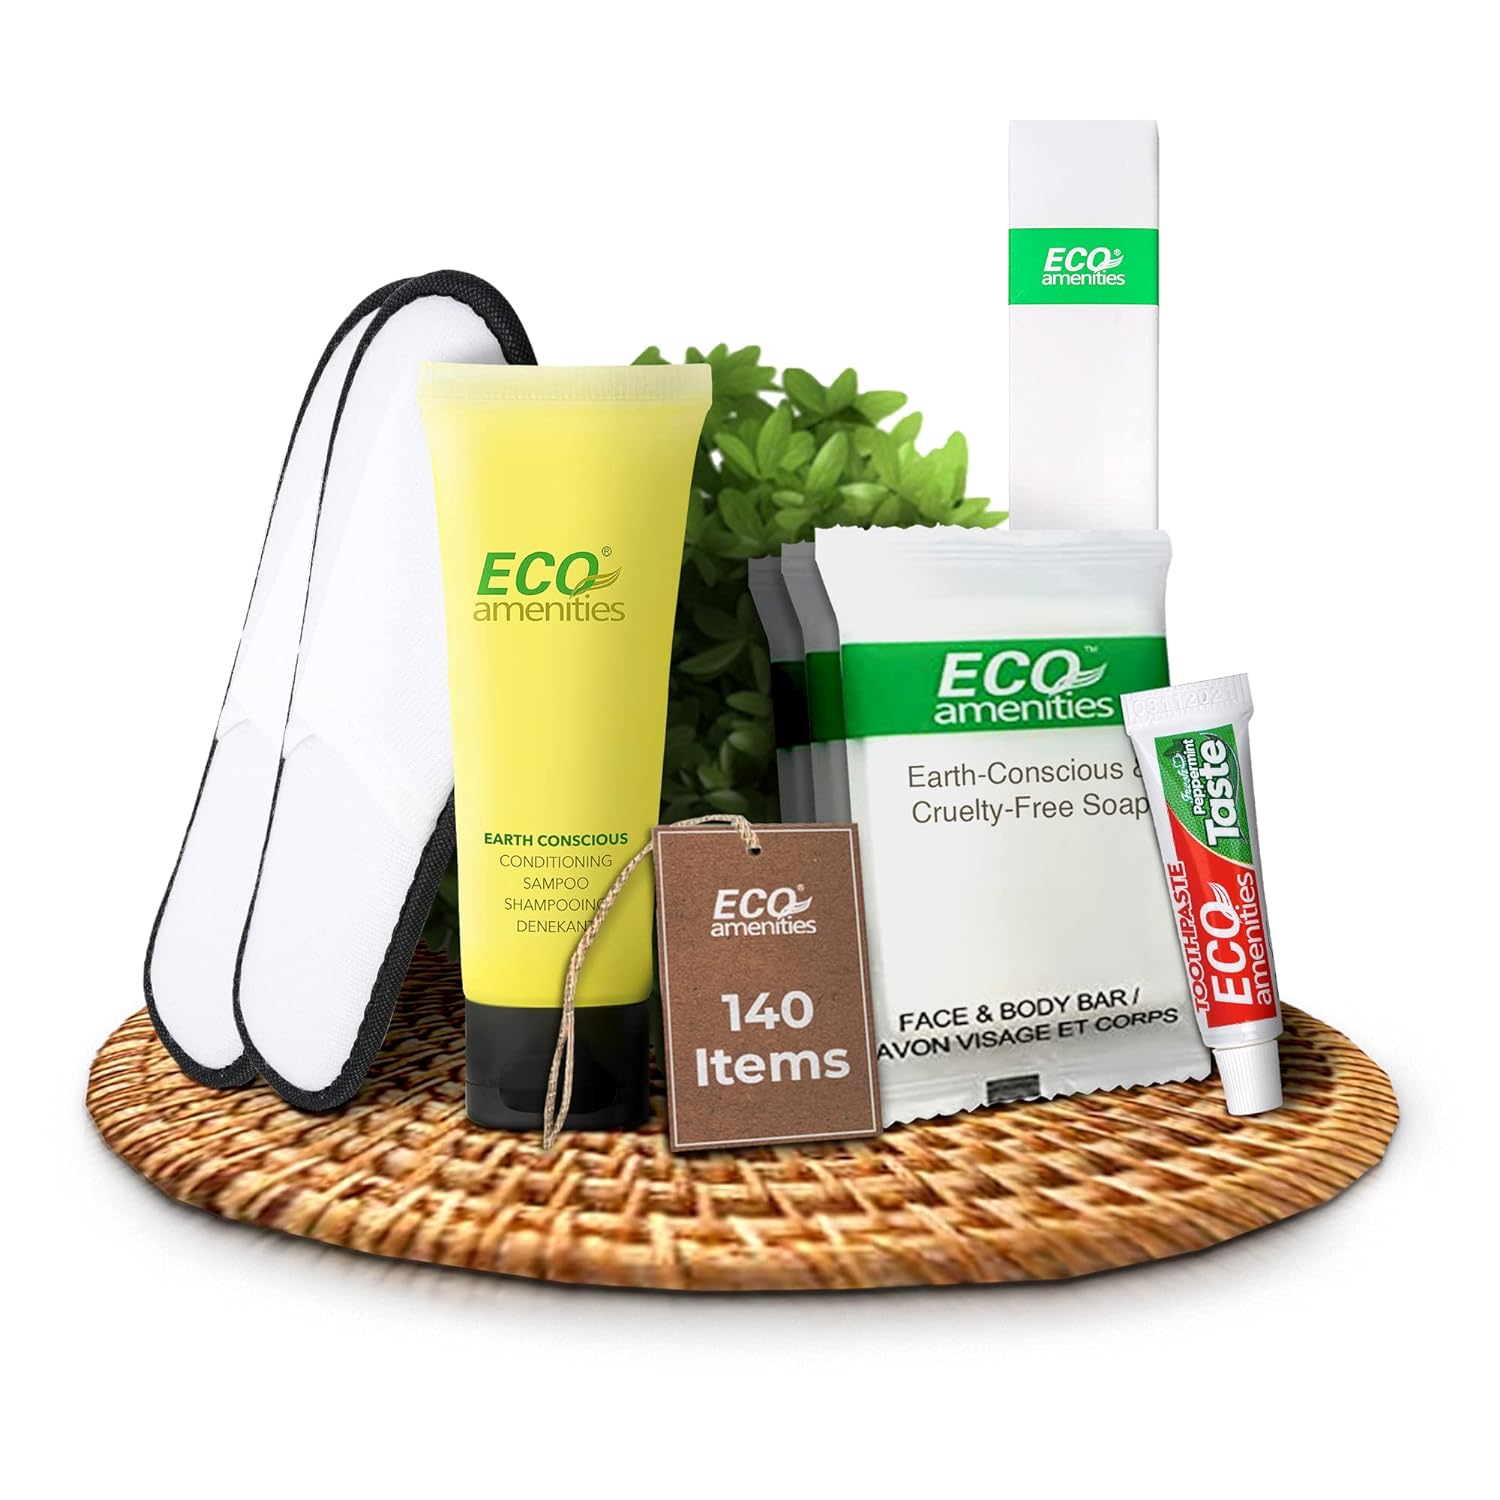 ECO Amenities 140 PIECE Bulk Hotel Toiletries Set - 30ml Conditioning Shampoo, 14g Bar Soap, Boxed Toothbrush and Toothpaste (40 each), Closed Toe Slippers (20 pairs) for Travel, Hotels, AirBnB Guests